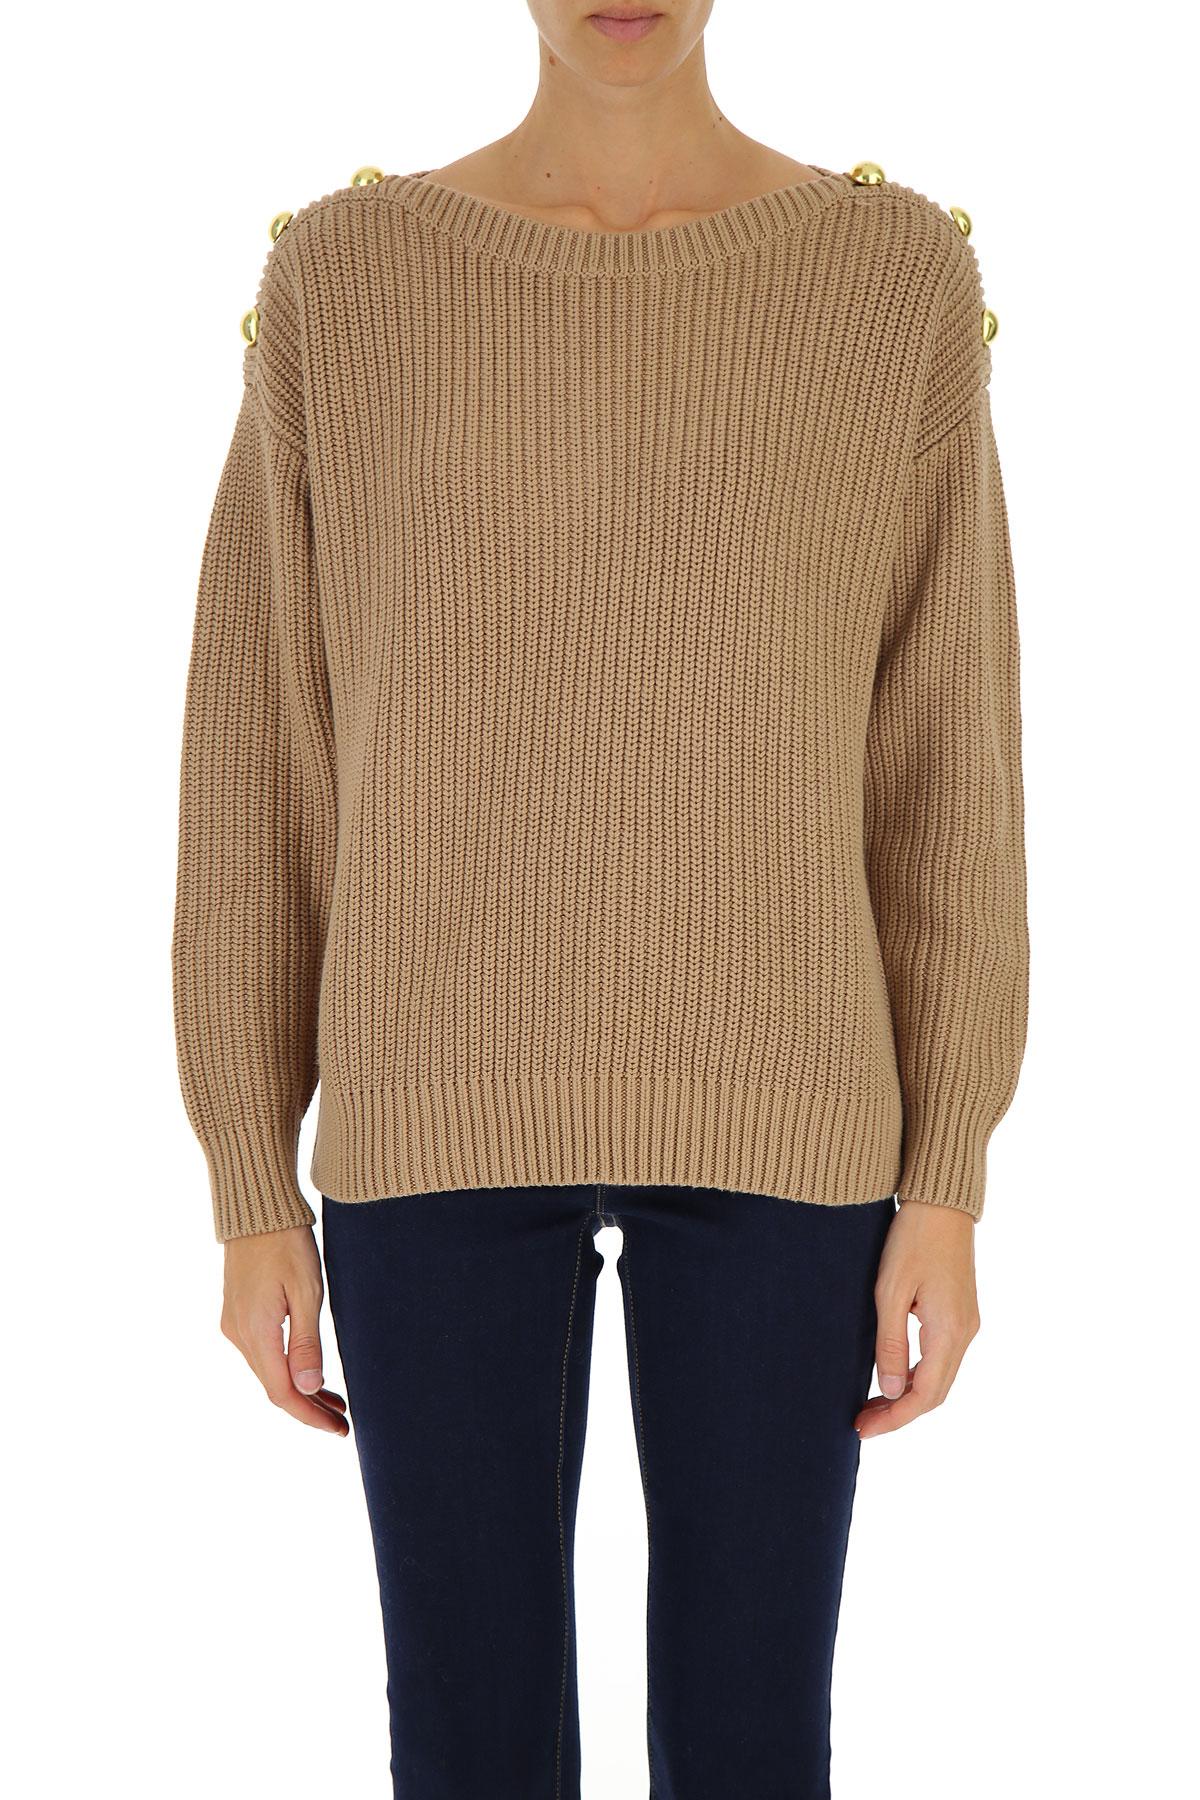 michael kors sweaters outlet